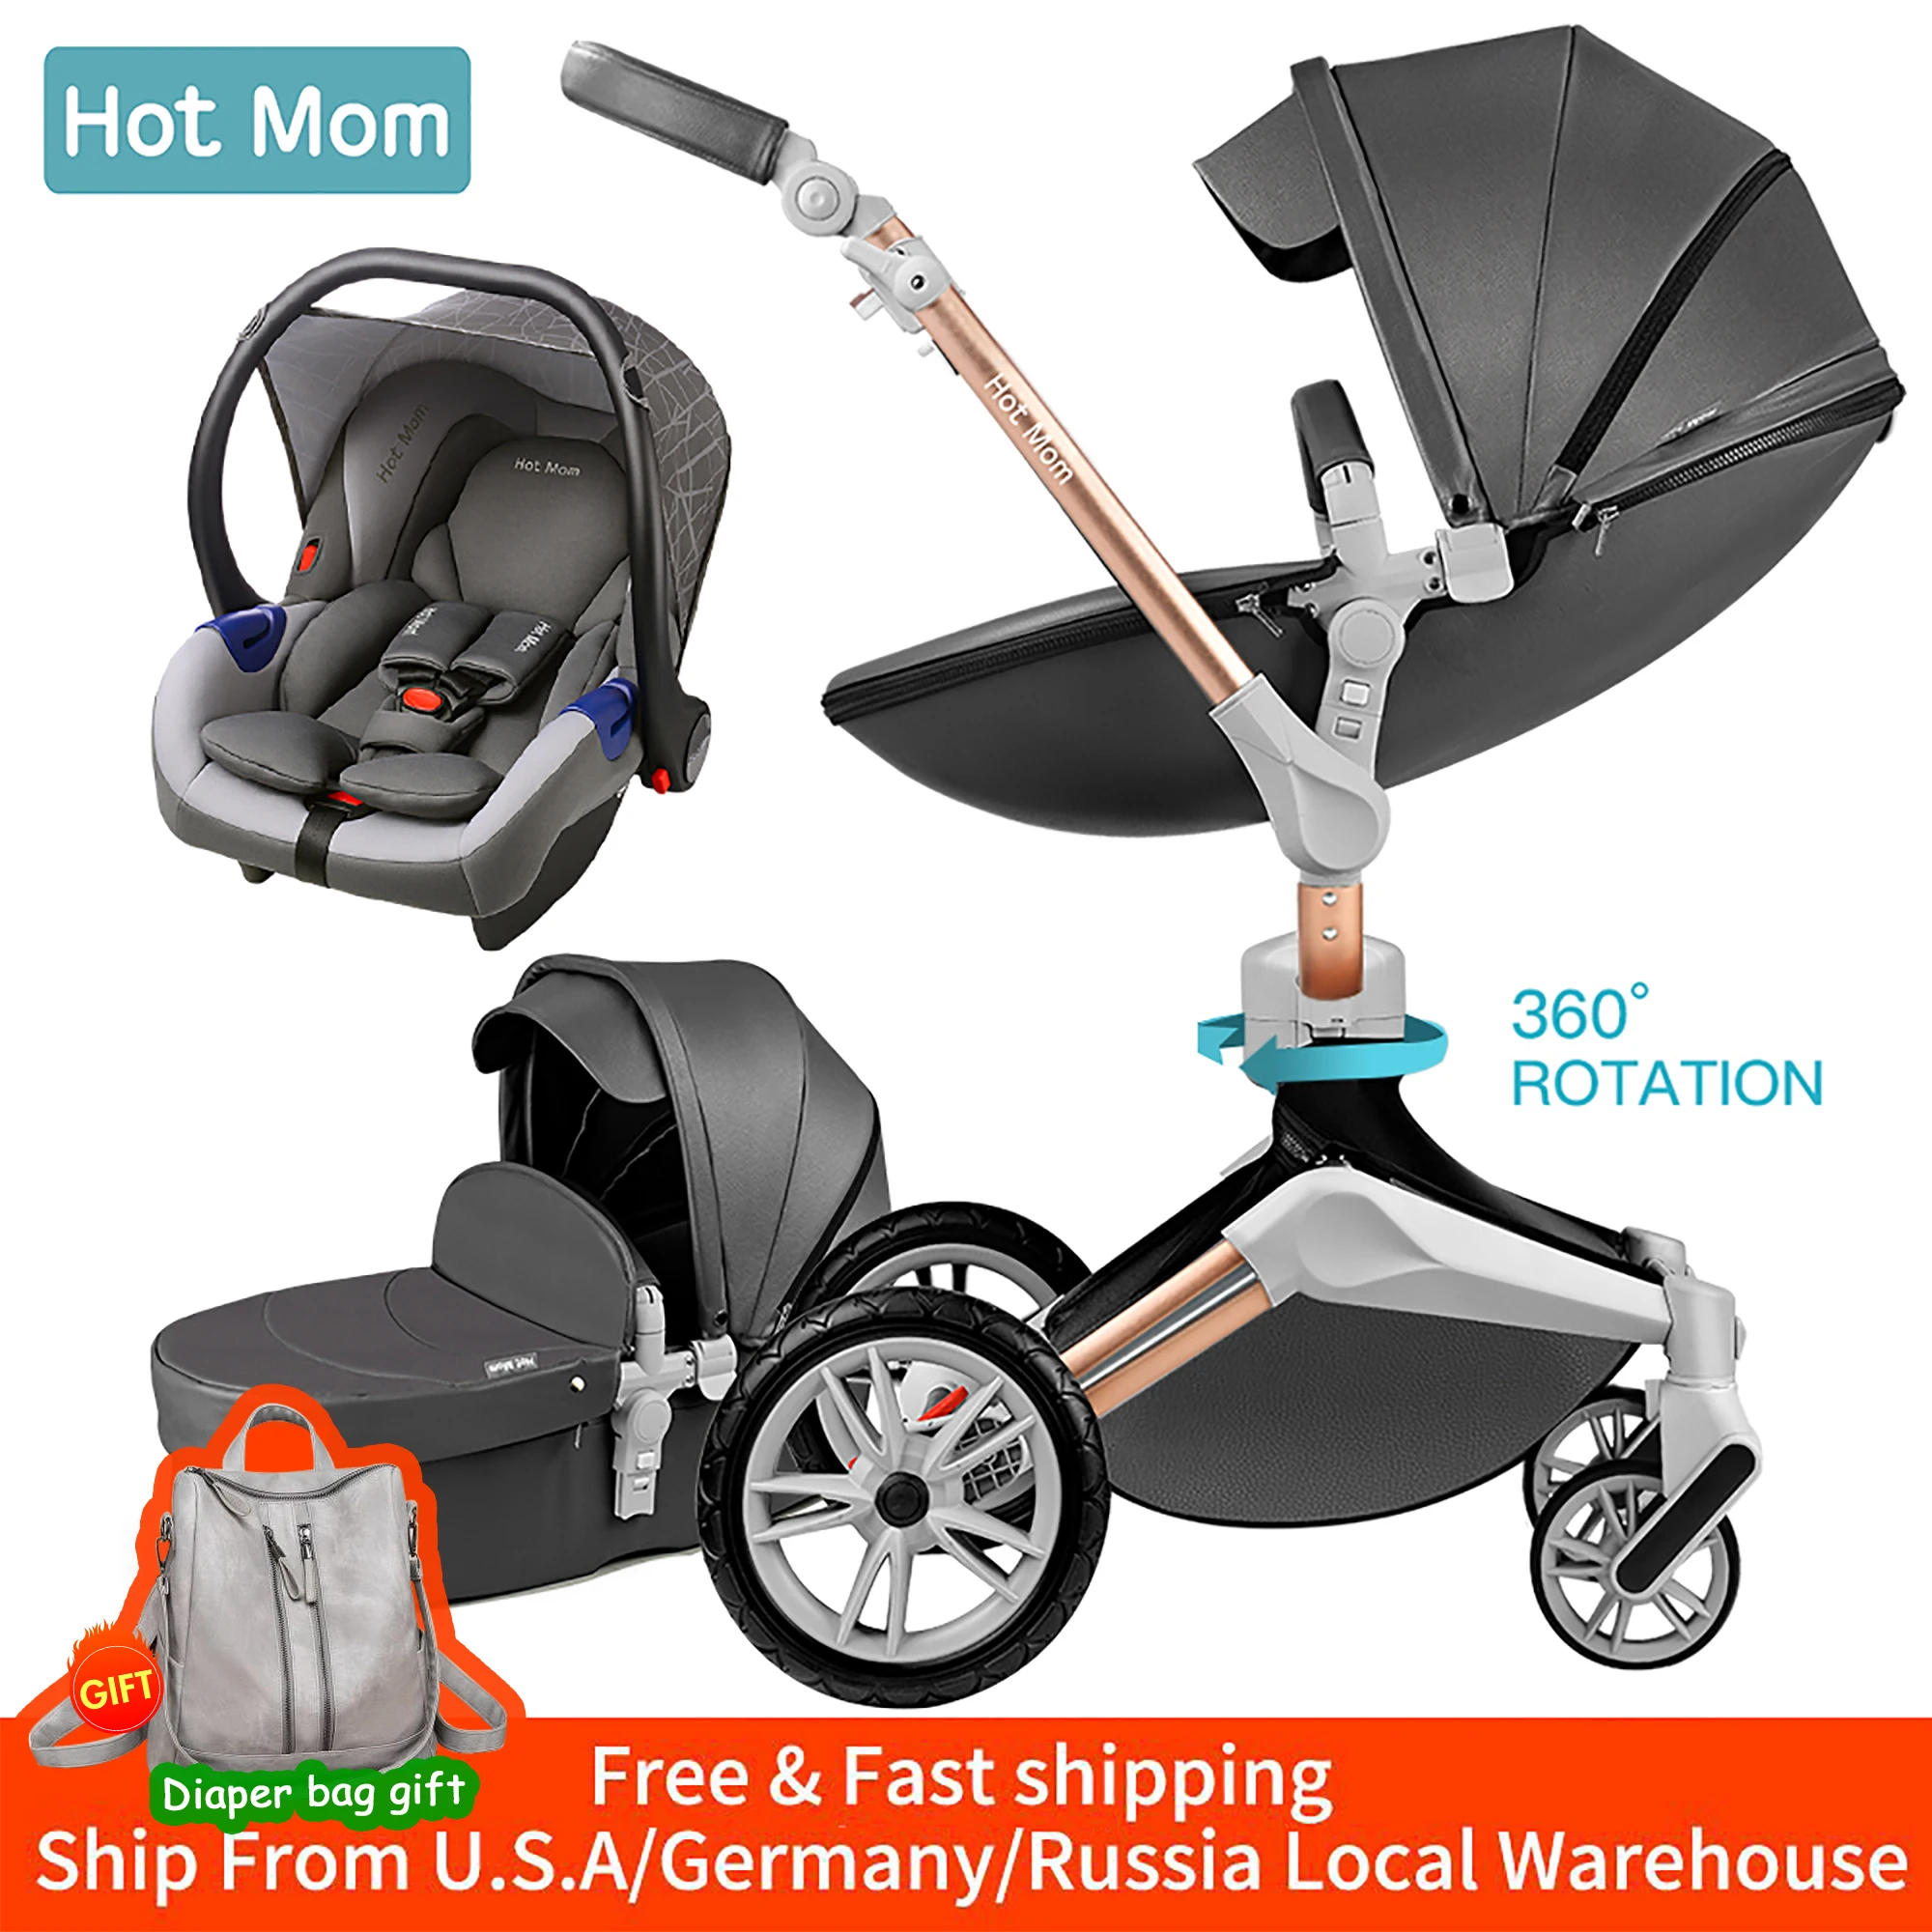 Hot Mom Baby Stroller 3 in 1 with Car Seat Bassinet Carriage For Newborn 360°Rotate Travel Pram Free Shipping F023